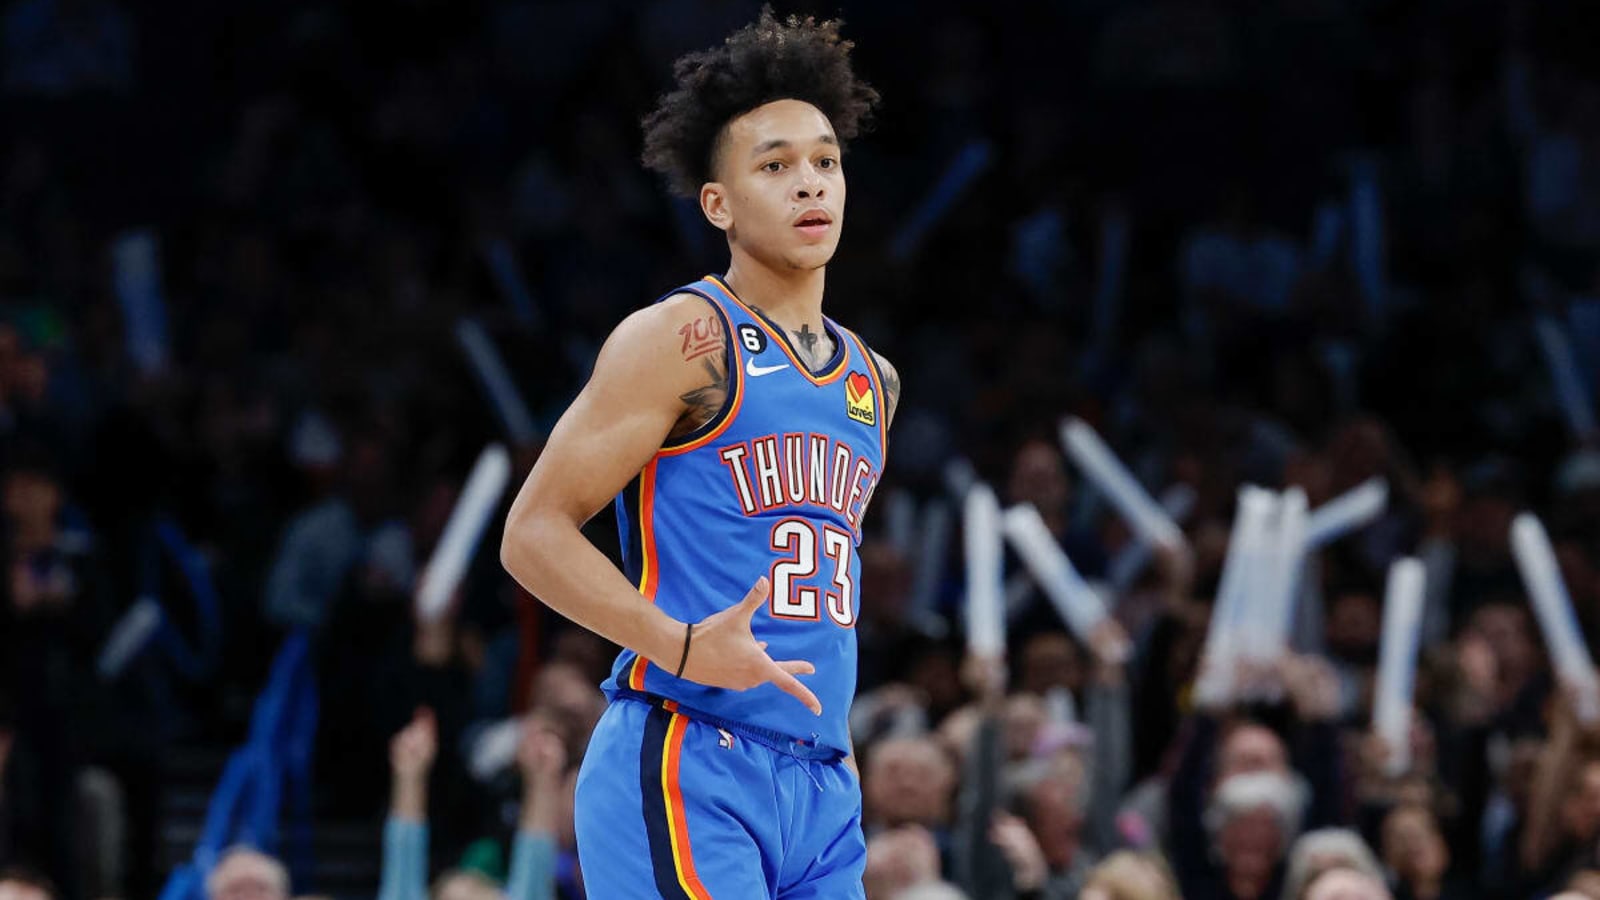 OKC Thunder Guard Tre Mann Listed as OUT With Excused Absence For Sunday Matchup